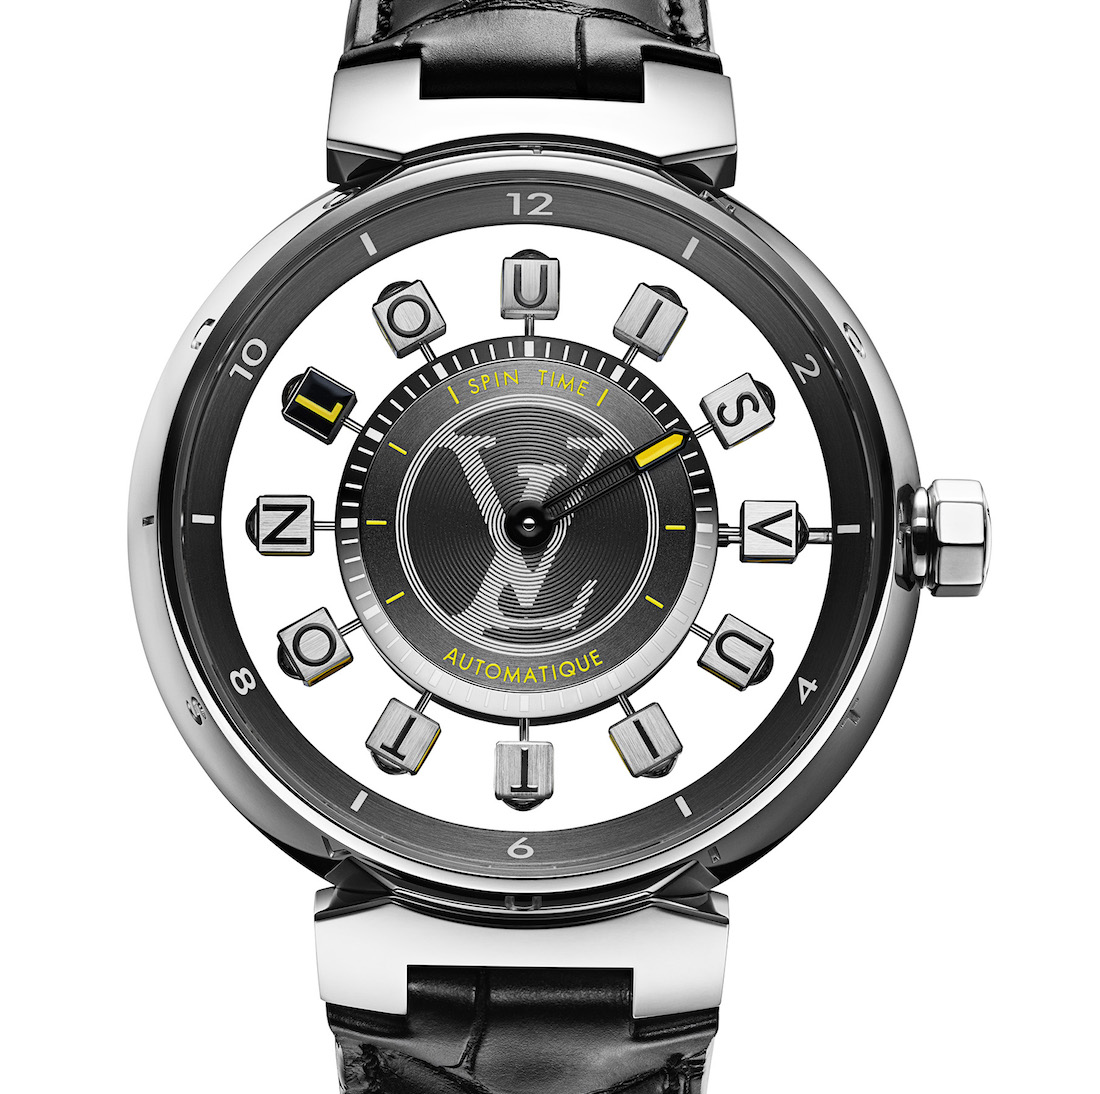 Louis Vuitton Tambour Spin Time Air Vivienne, Black – The Watch Pages